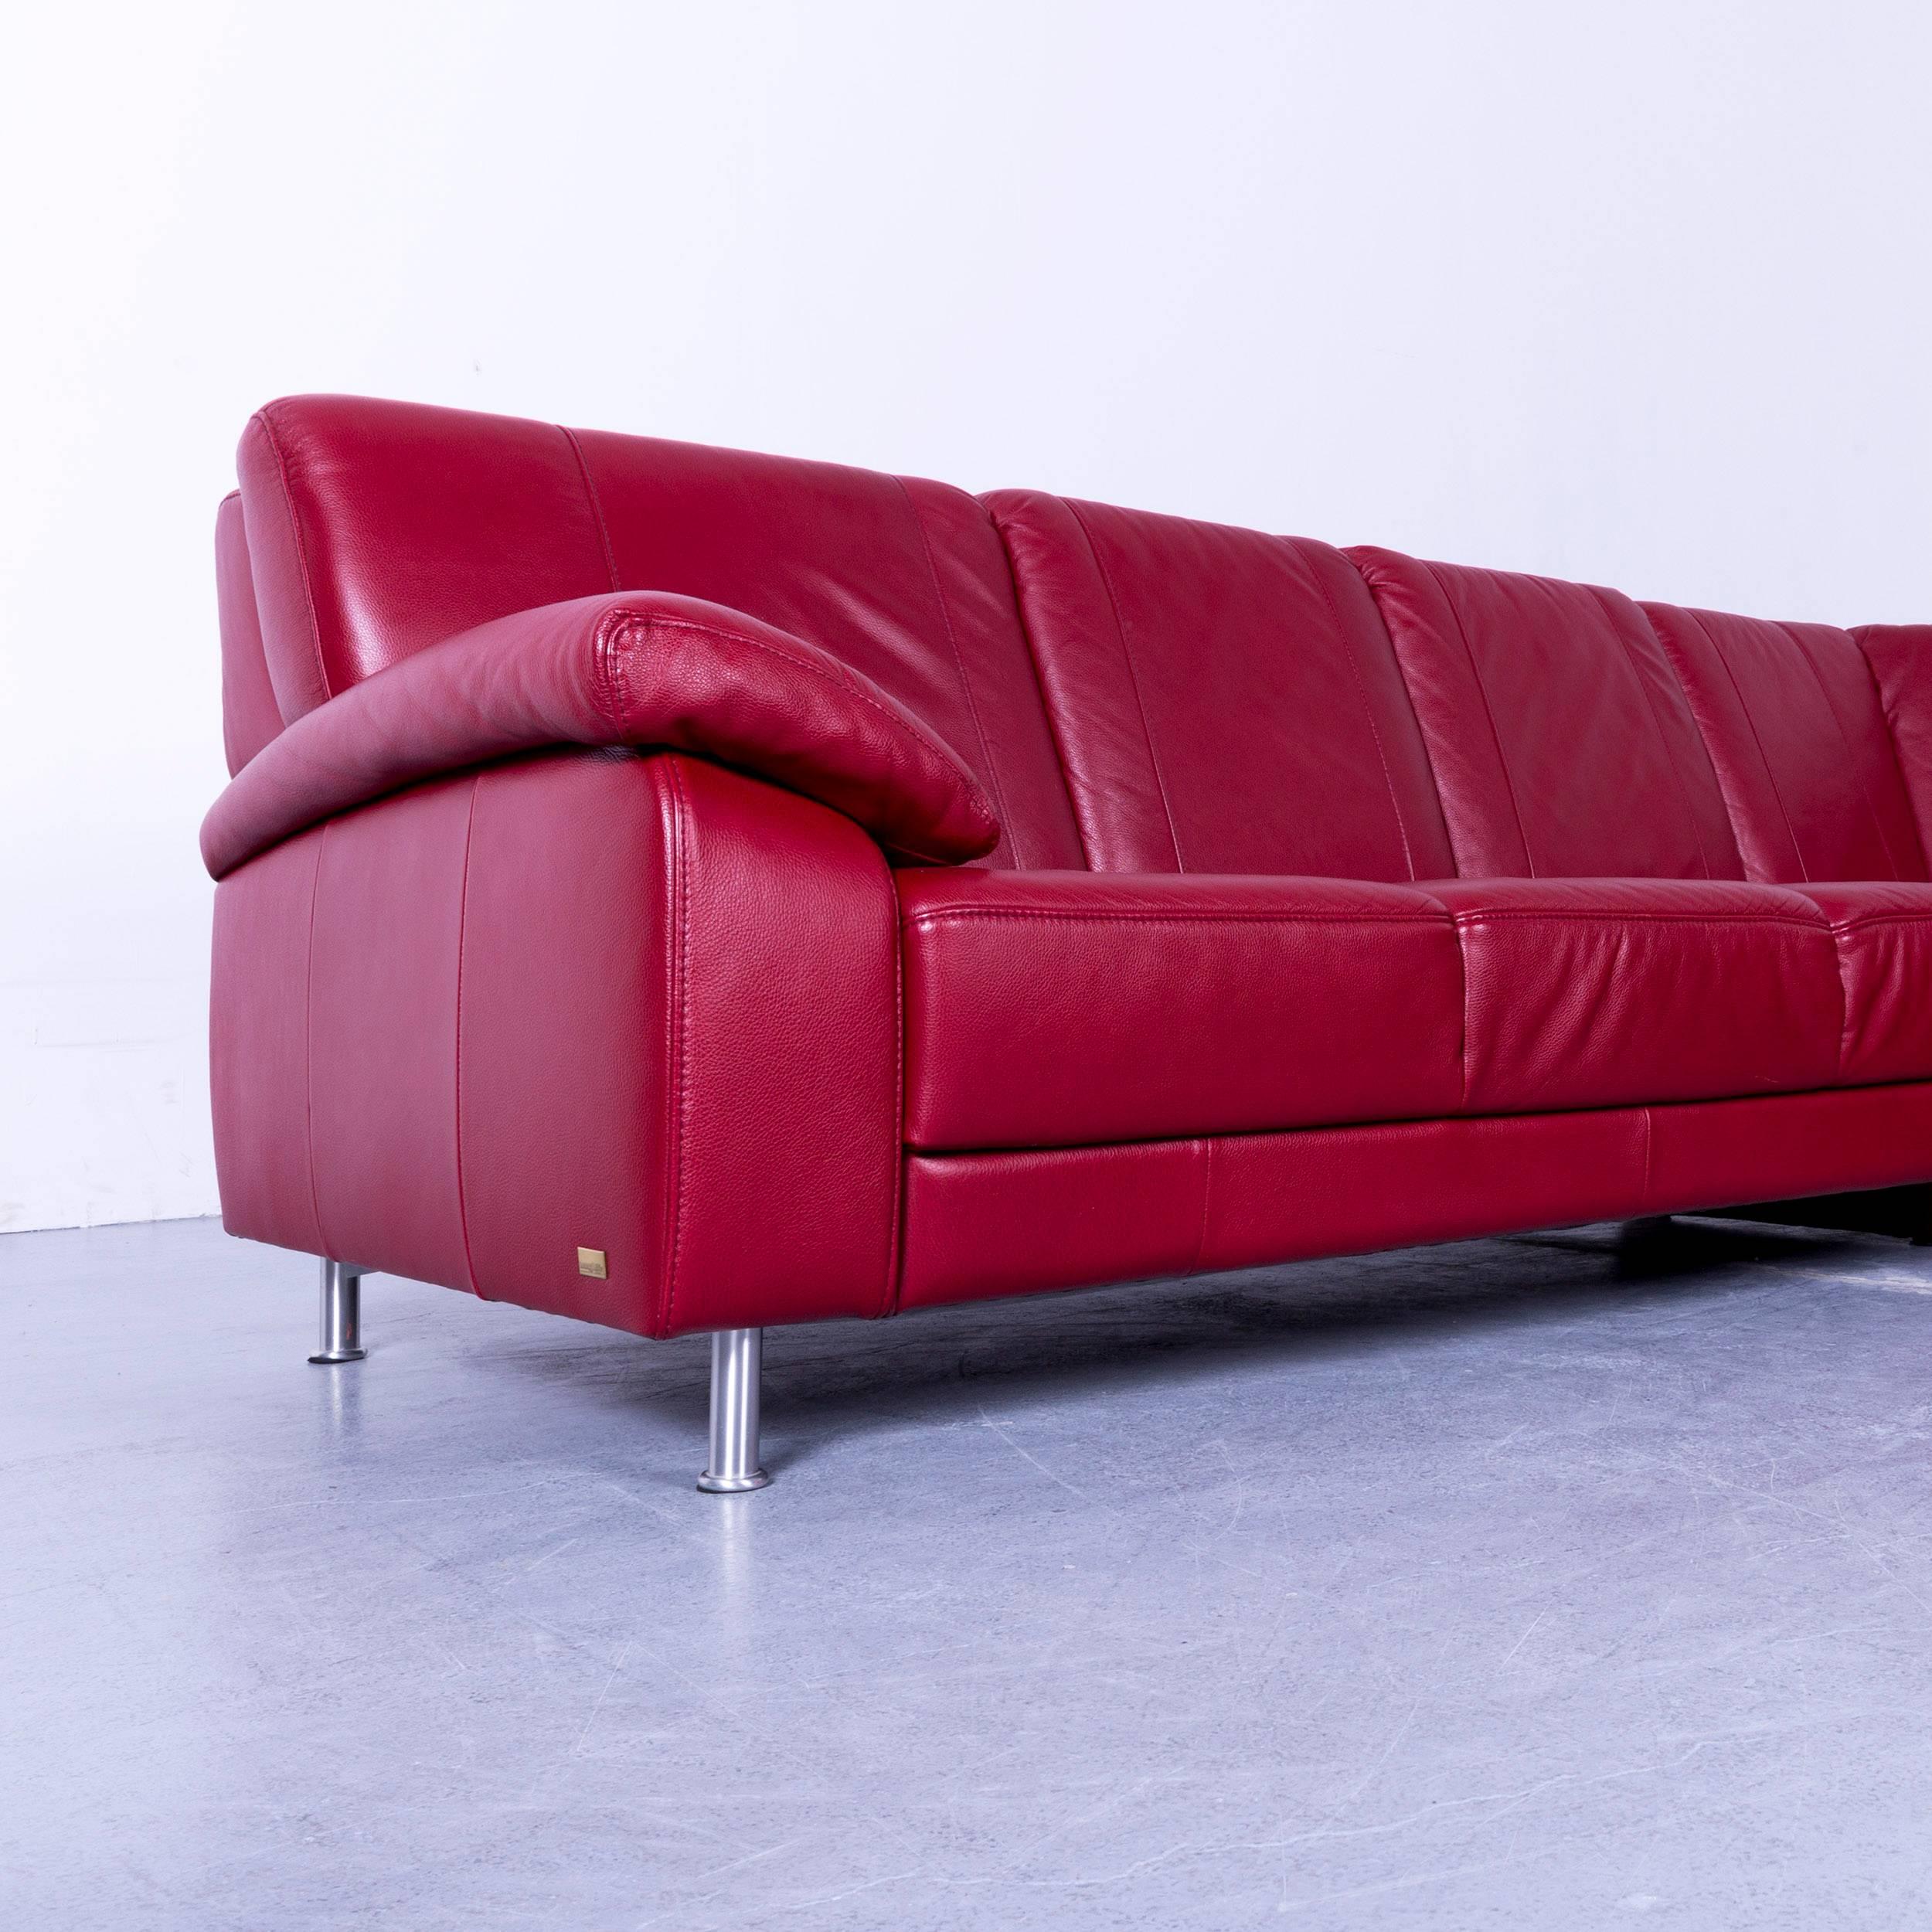 Contemporary Himolla Corner Sofa Leather Red Modern Couch